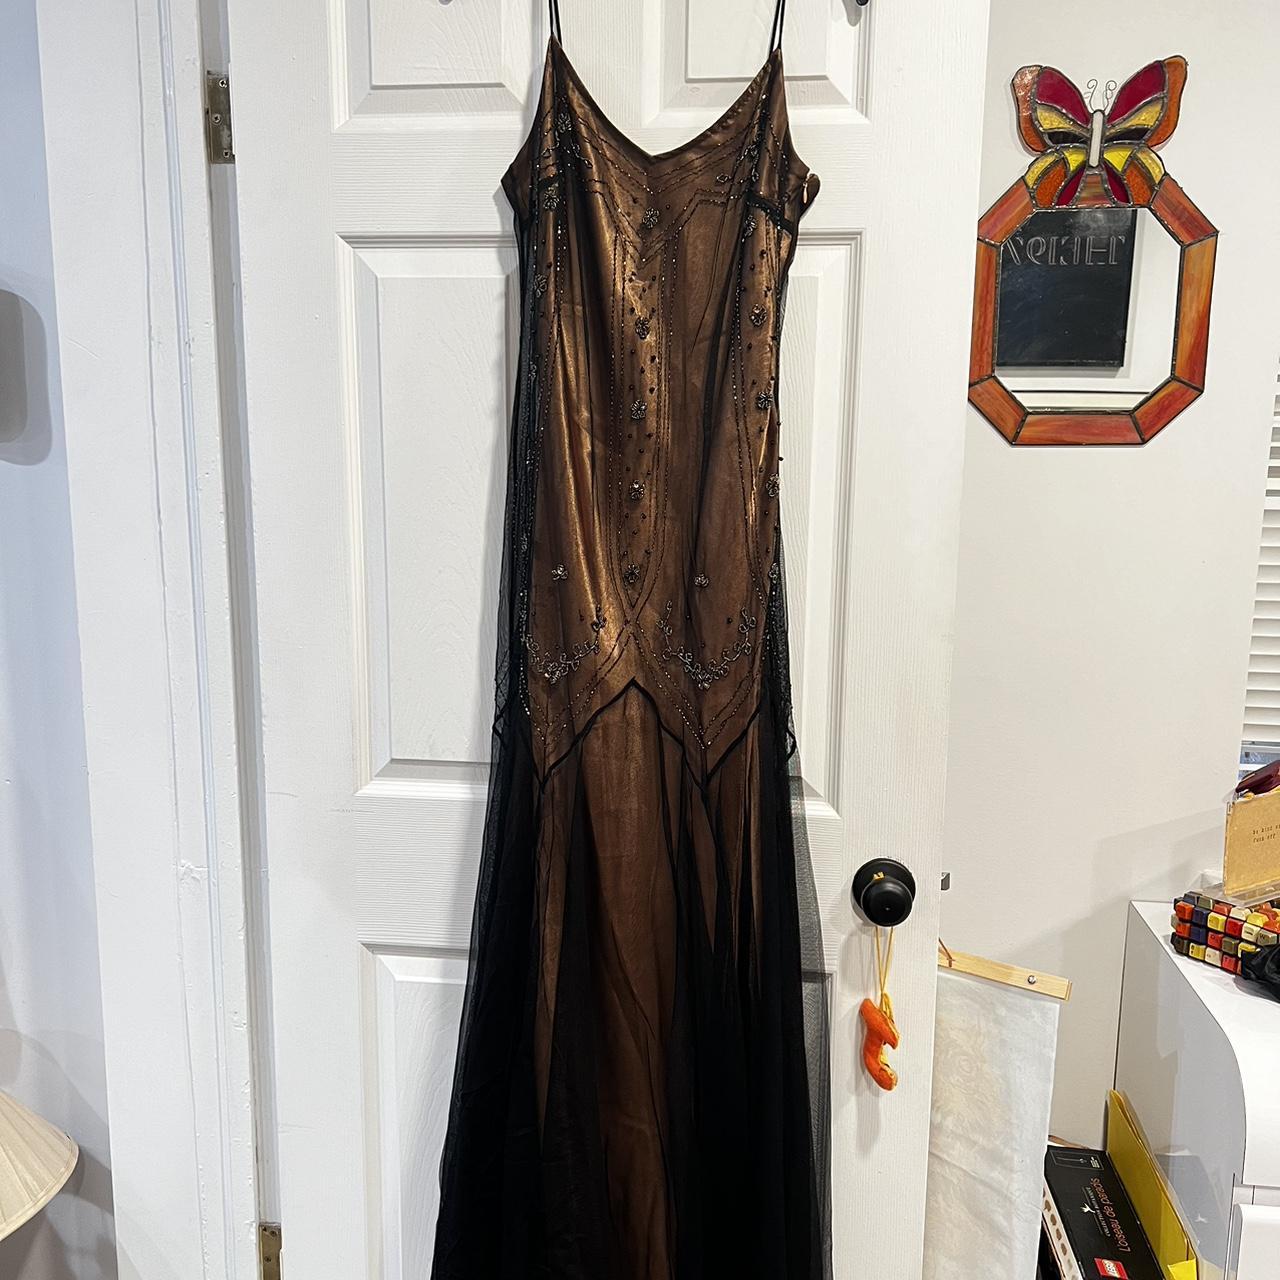 INSANE Gorgeous vintage formal/evening gown with... - Depop